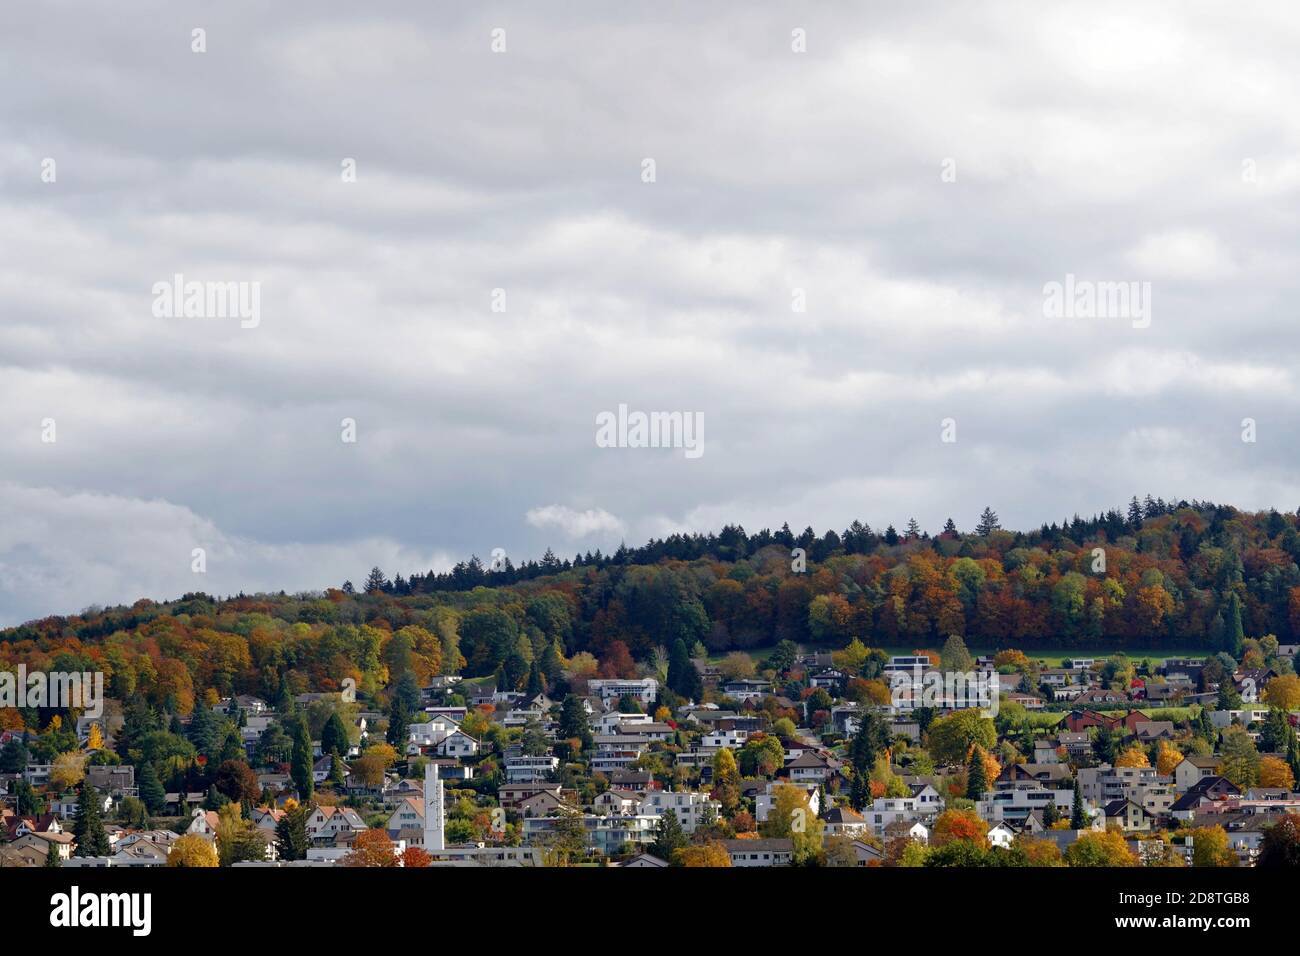 Panoramic view of village Urdorf, Switzerland, residential district with mixed forest on the background in various colors in autumn. Seasonal view. Stock Photo